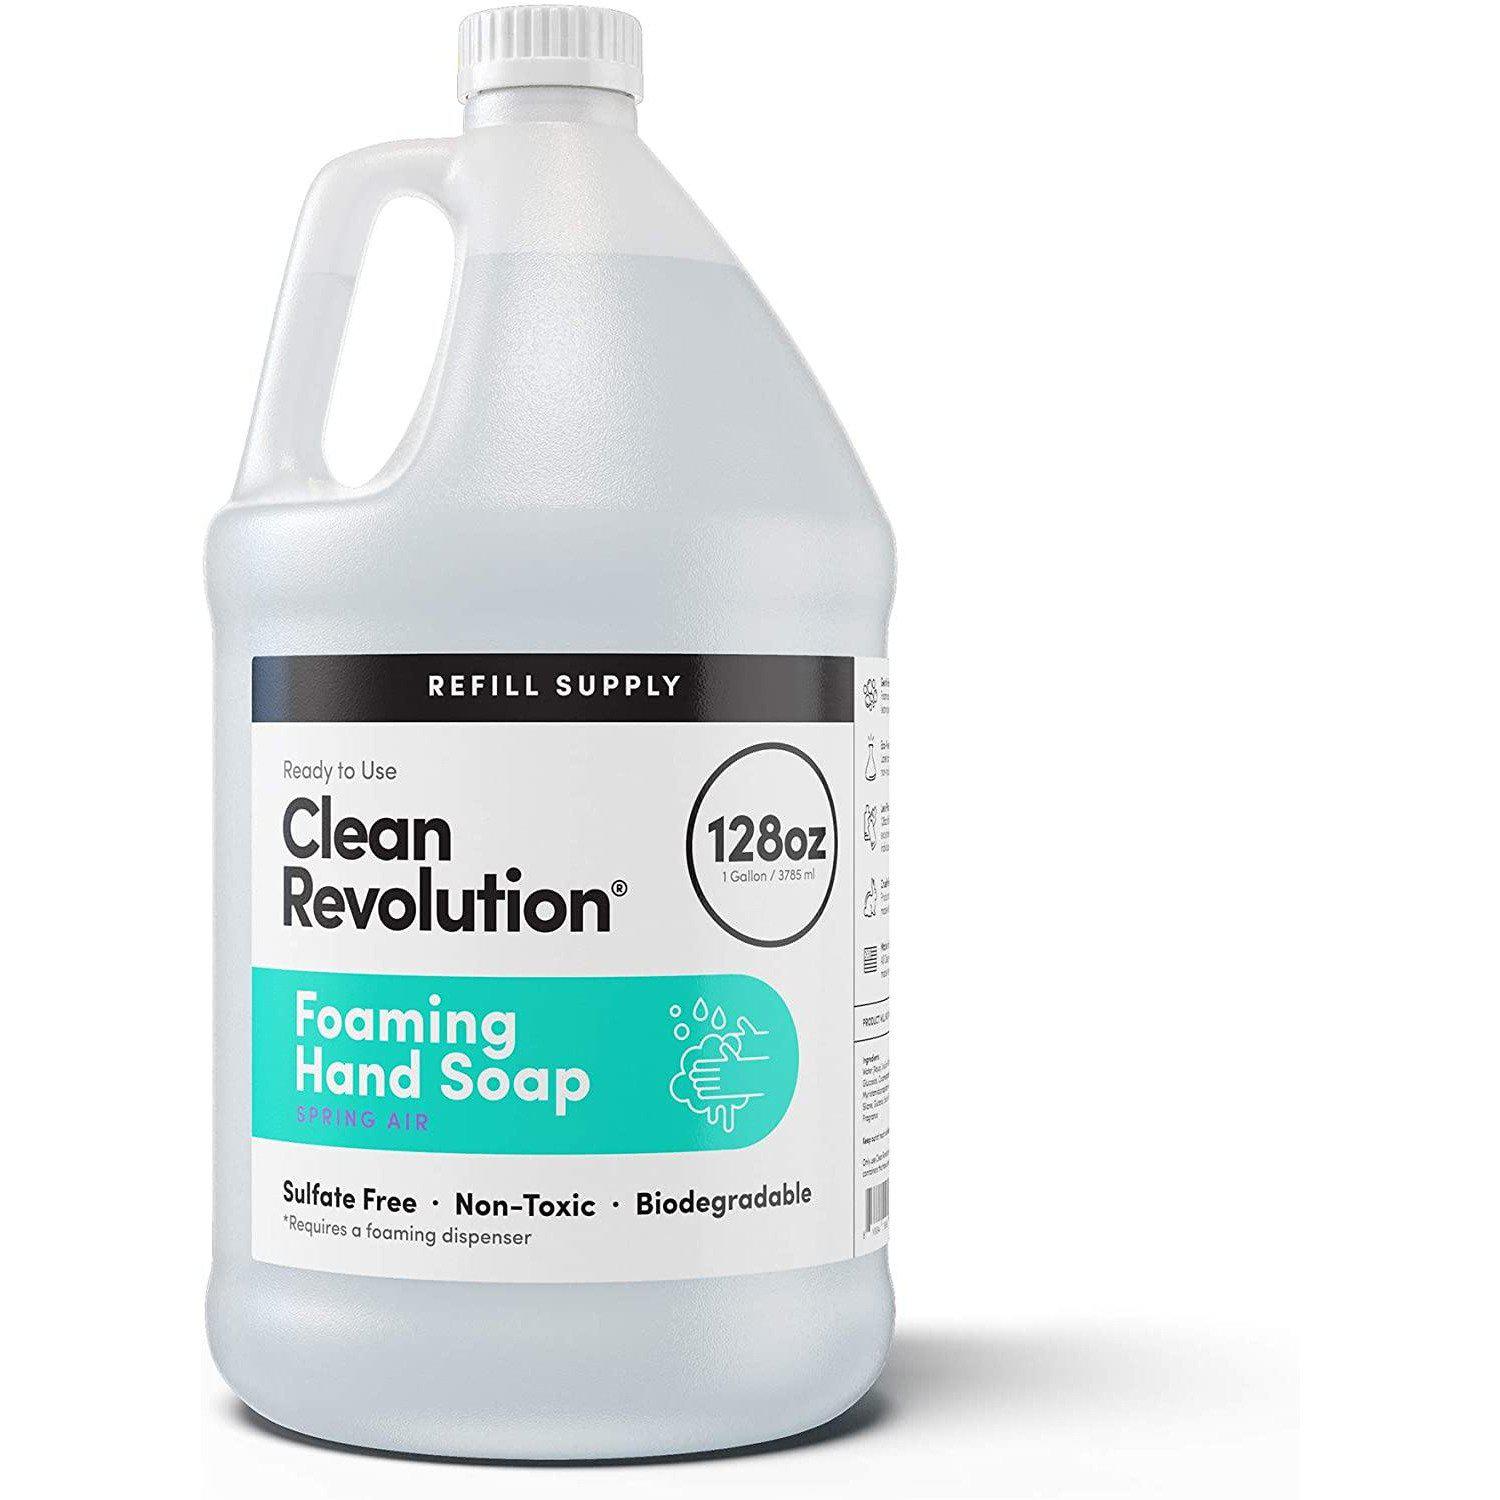 Clean Revolution Foaming Hand Soap Refill Supply Container. Ready to Use Formula. Spring Air Fragrance, 128 fl. oz